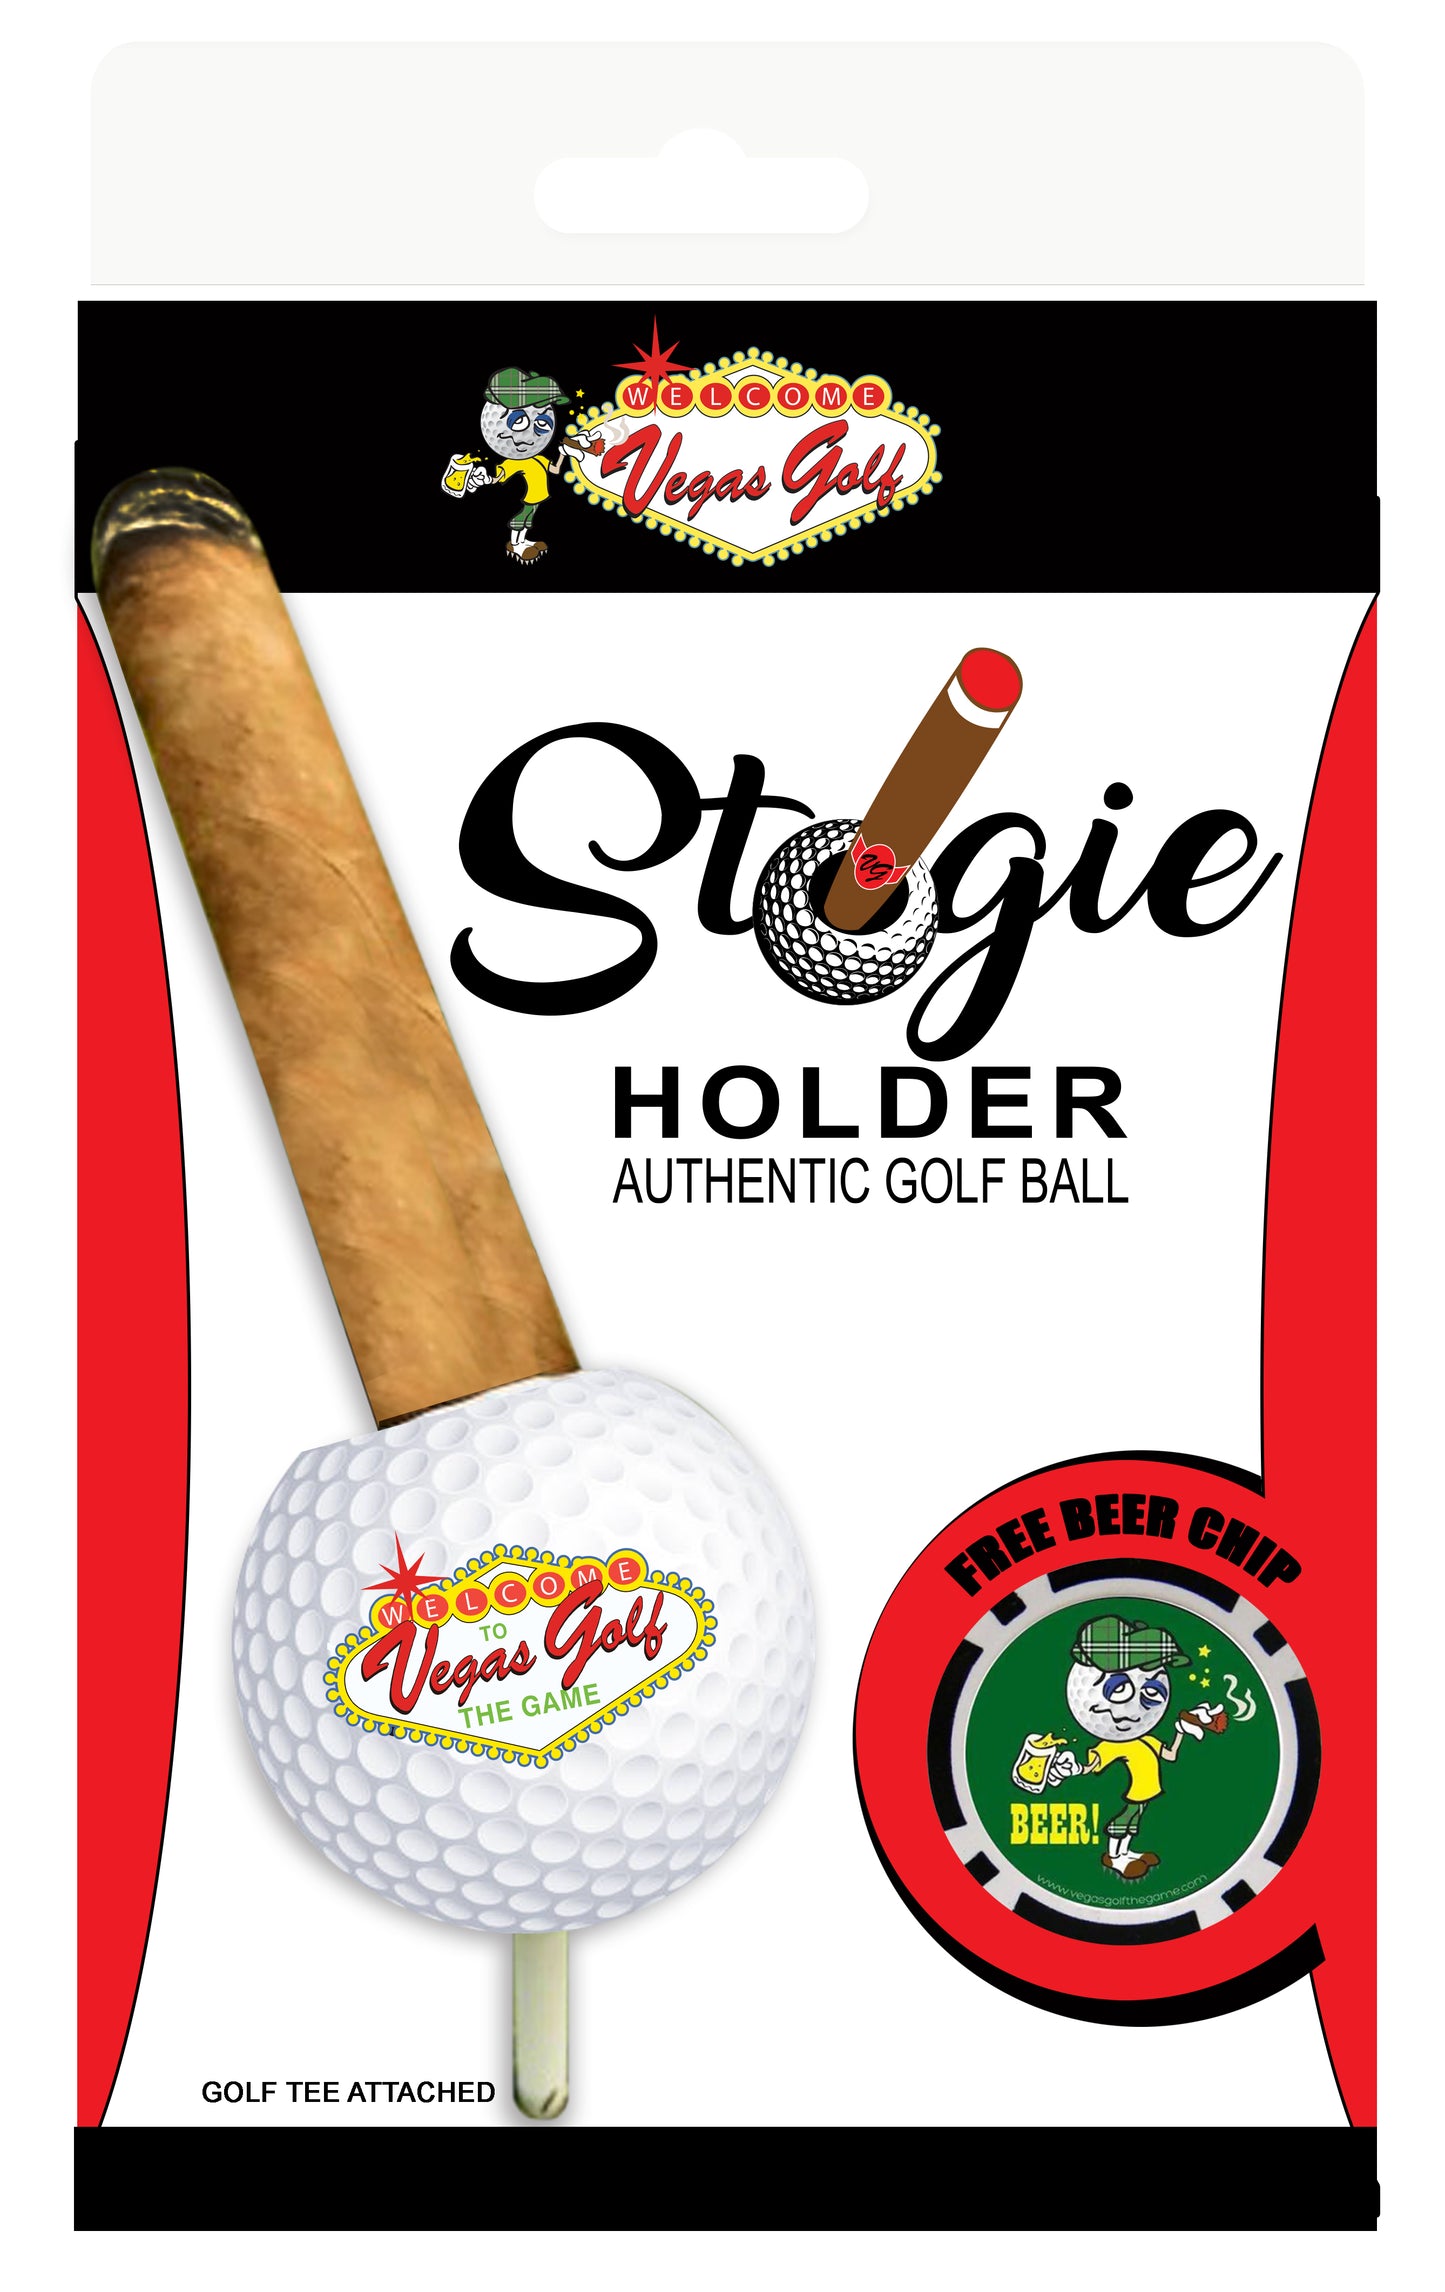 COMING SOON! Authentic Golf Ball STOGIE HOLDER